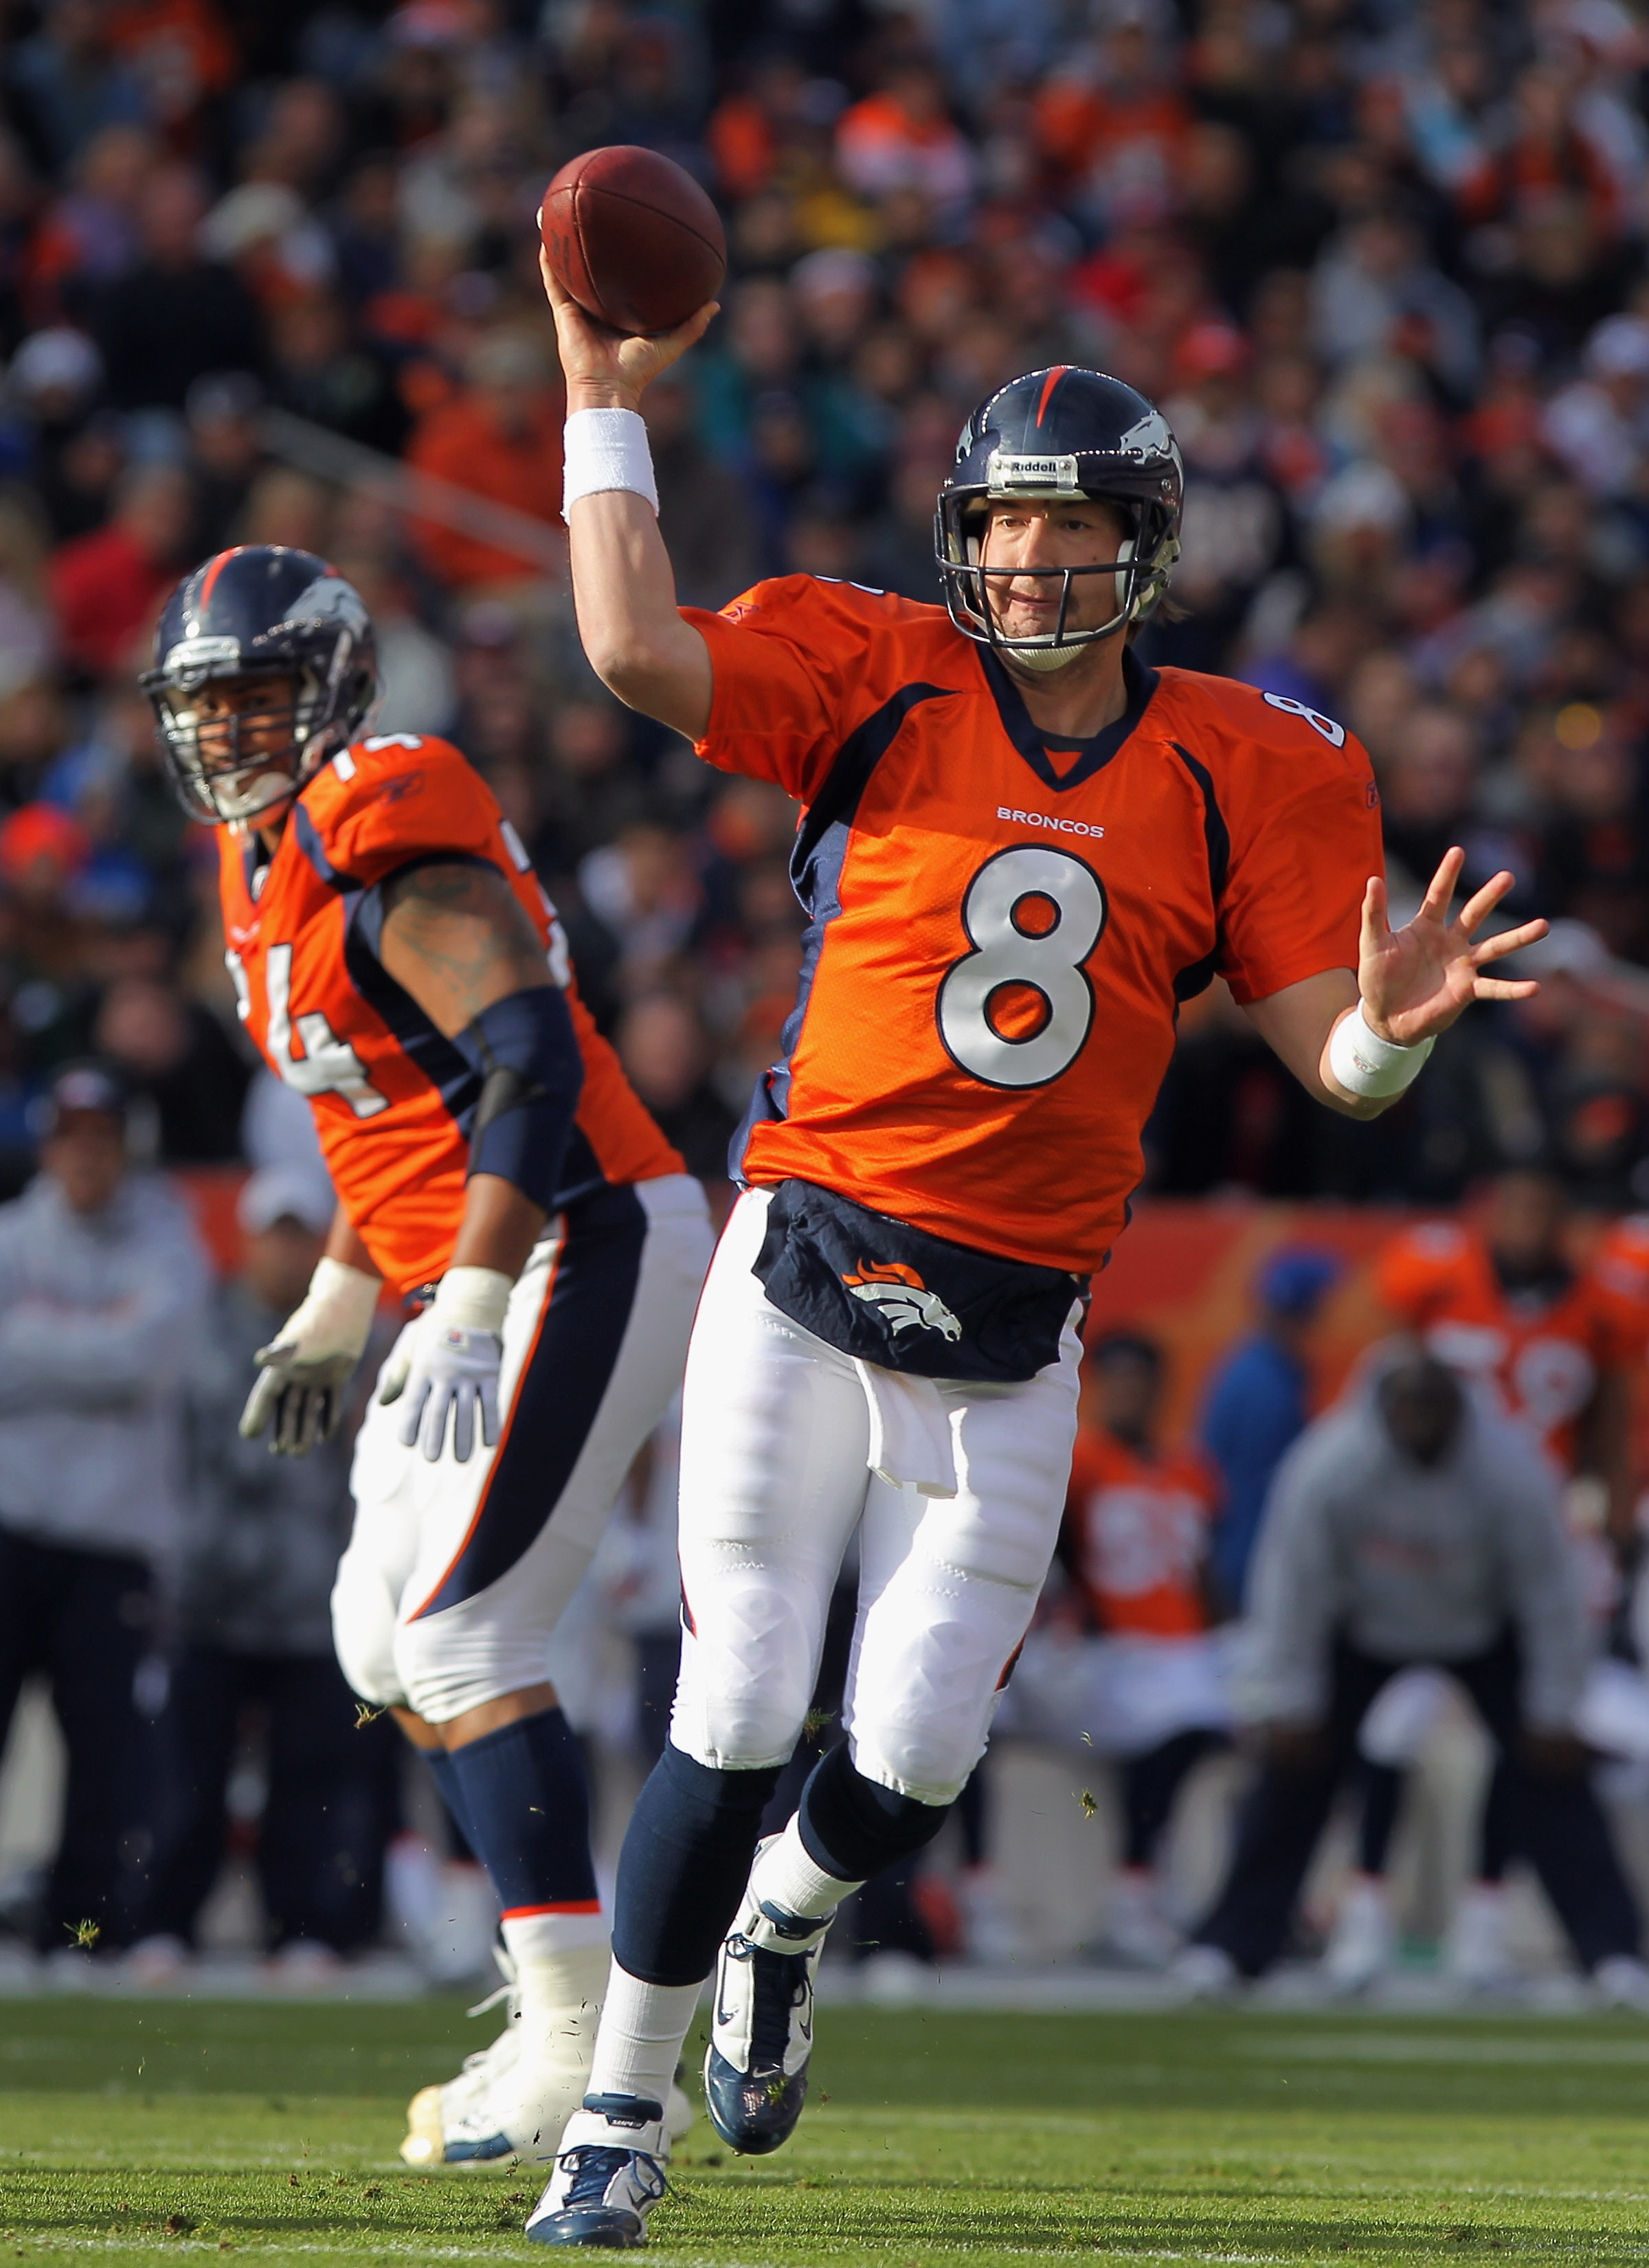 DENVER - NOVEMBER 14:  Quarterback Kyle Orton #8 of the Denver Broncos rolls out and delivers a pass against the Kansas City Chiefs in the first quarter at INVESCO Field at Mile High on November 14, 2010 in Denver, Colorado. The Broncos defeated the Chief